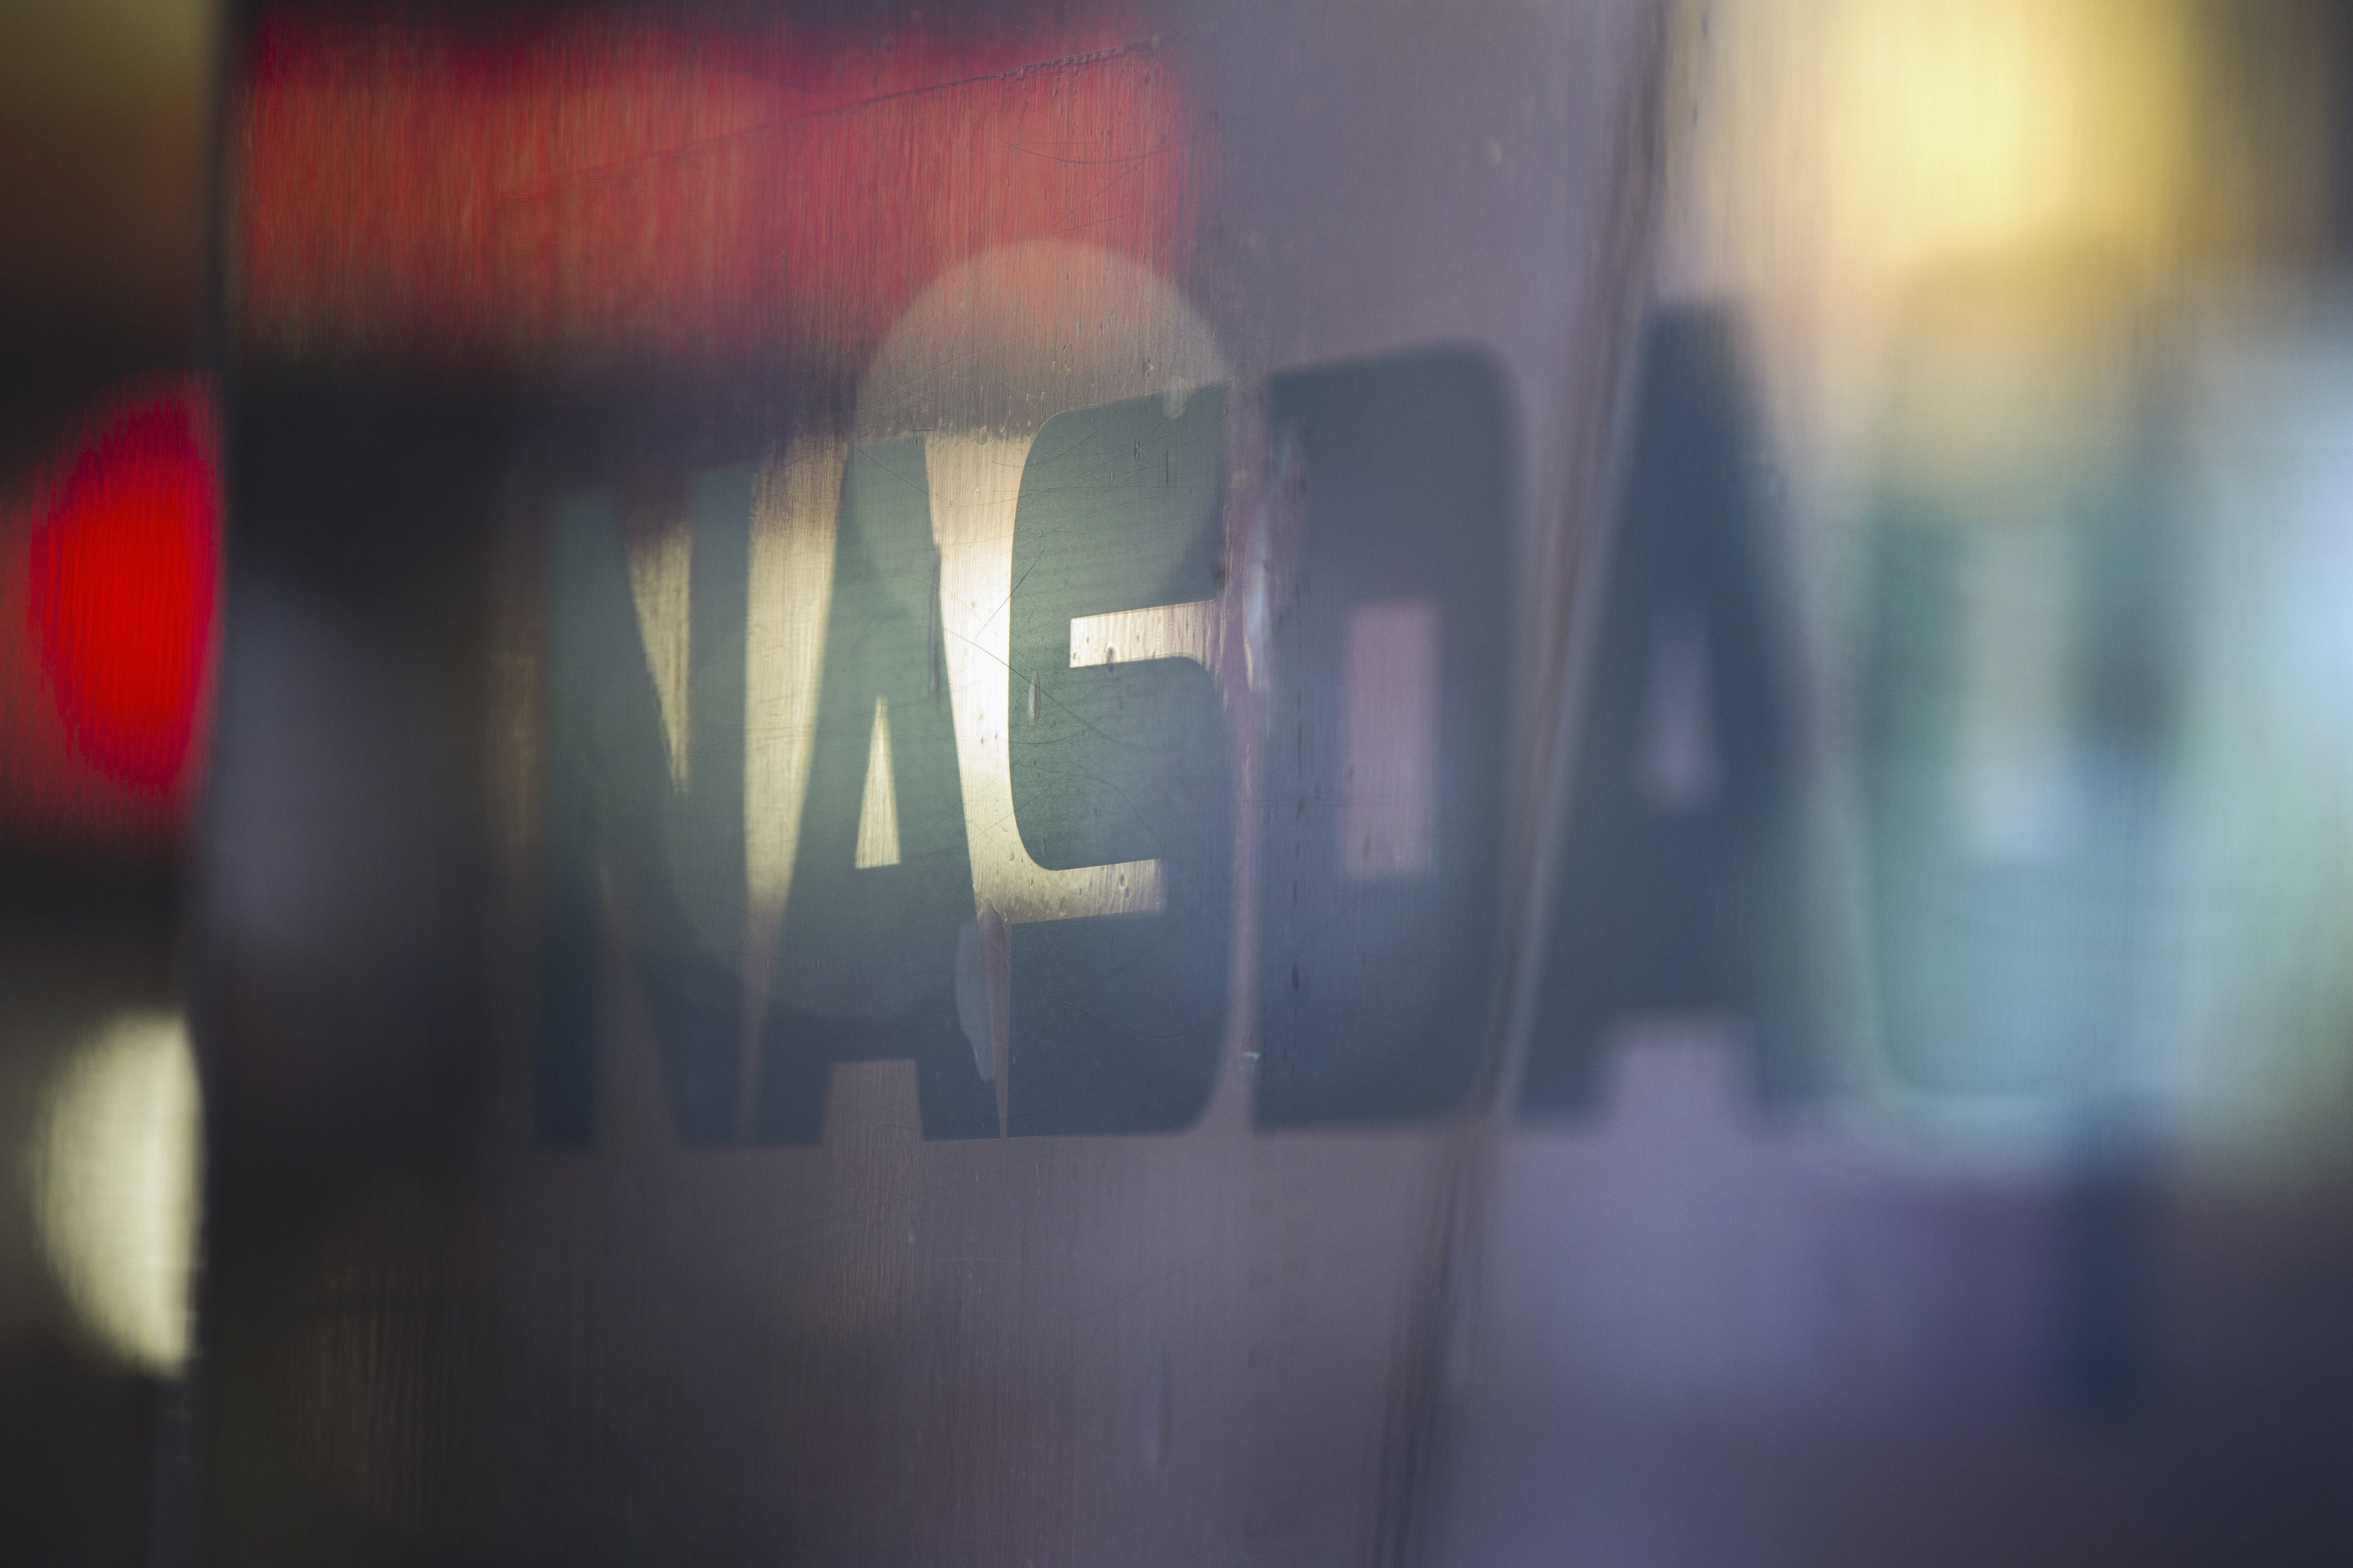 A logo is seen on a window outside of the Nasdaq MarketSite building in New York's Times Square